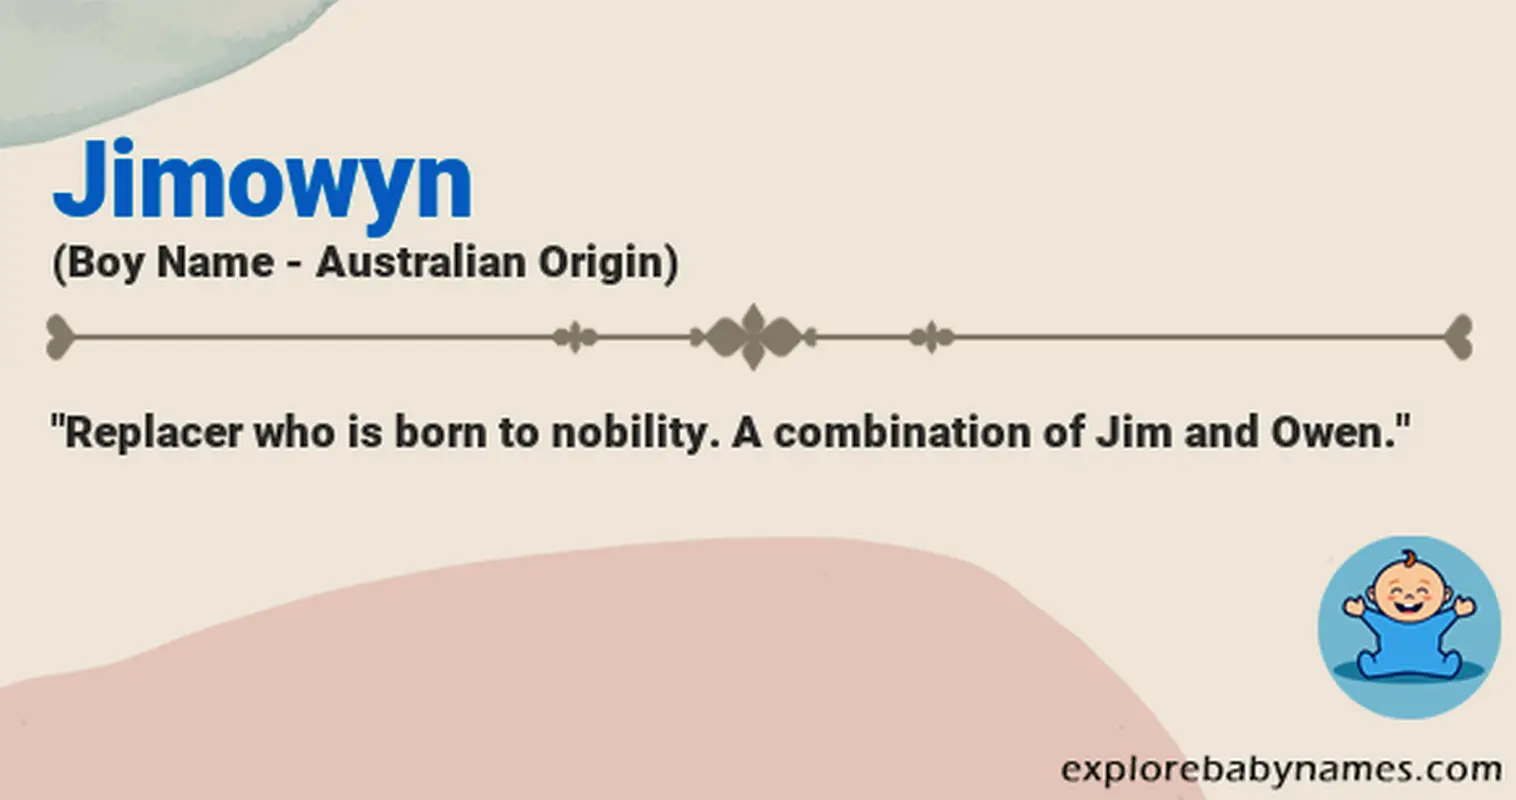 Meaning of Jimowyn